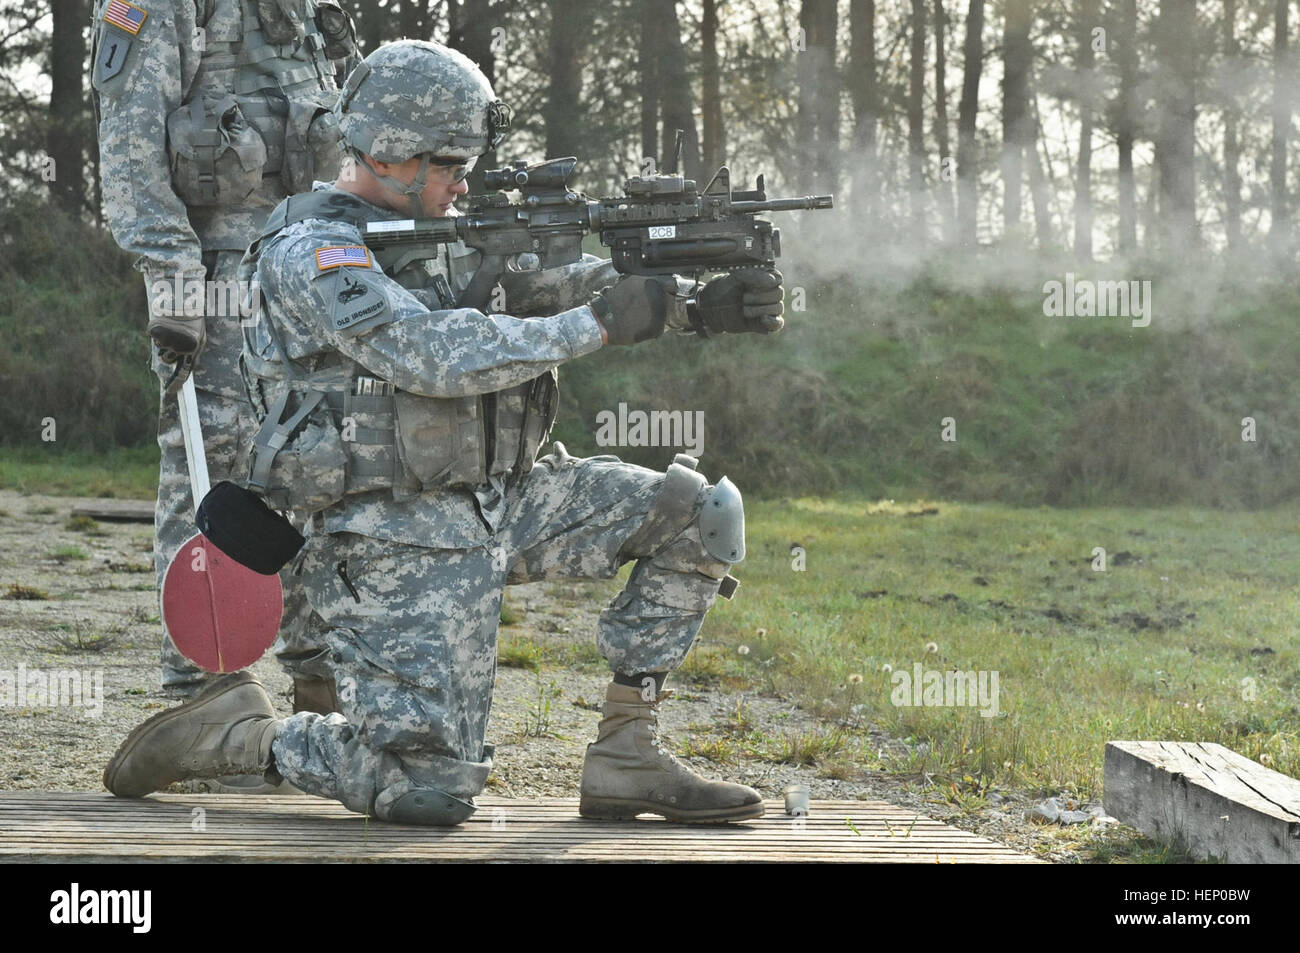 Dragoon Troopers assigned to 1st Squadron, 2nd Cavalry Regiment fire 40 mm practice rounds from a M320 grenade launcher during their grenade launcher qualification range at Grafenwoehr Training Area located near Rose Barracks, Germany, Nov. 25, 2014. Troopers familiarized themselves with the weapon prior to qualifying later on in the day. 1st Sqdn, 2 CR Grenade Launcher Range 141125-A-EM105-530 Stock Photo